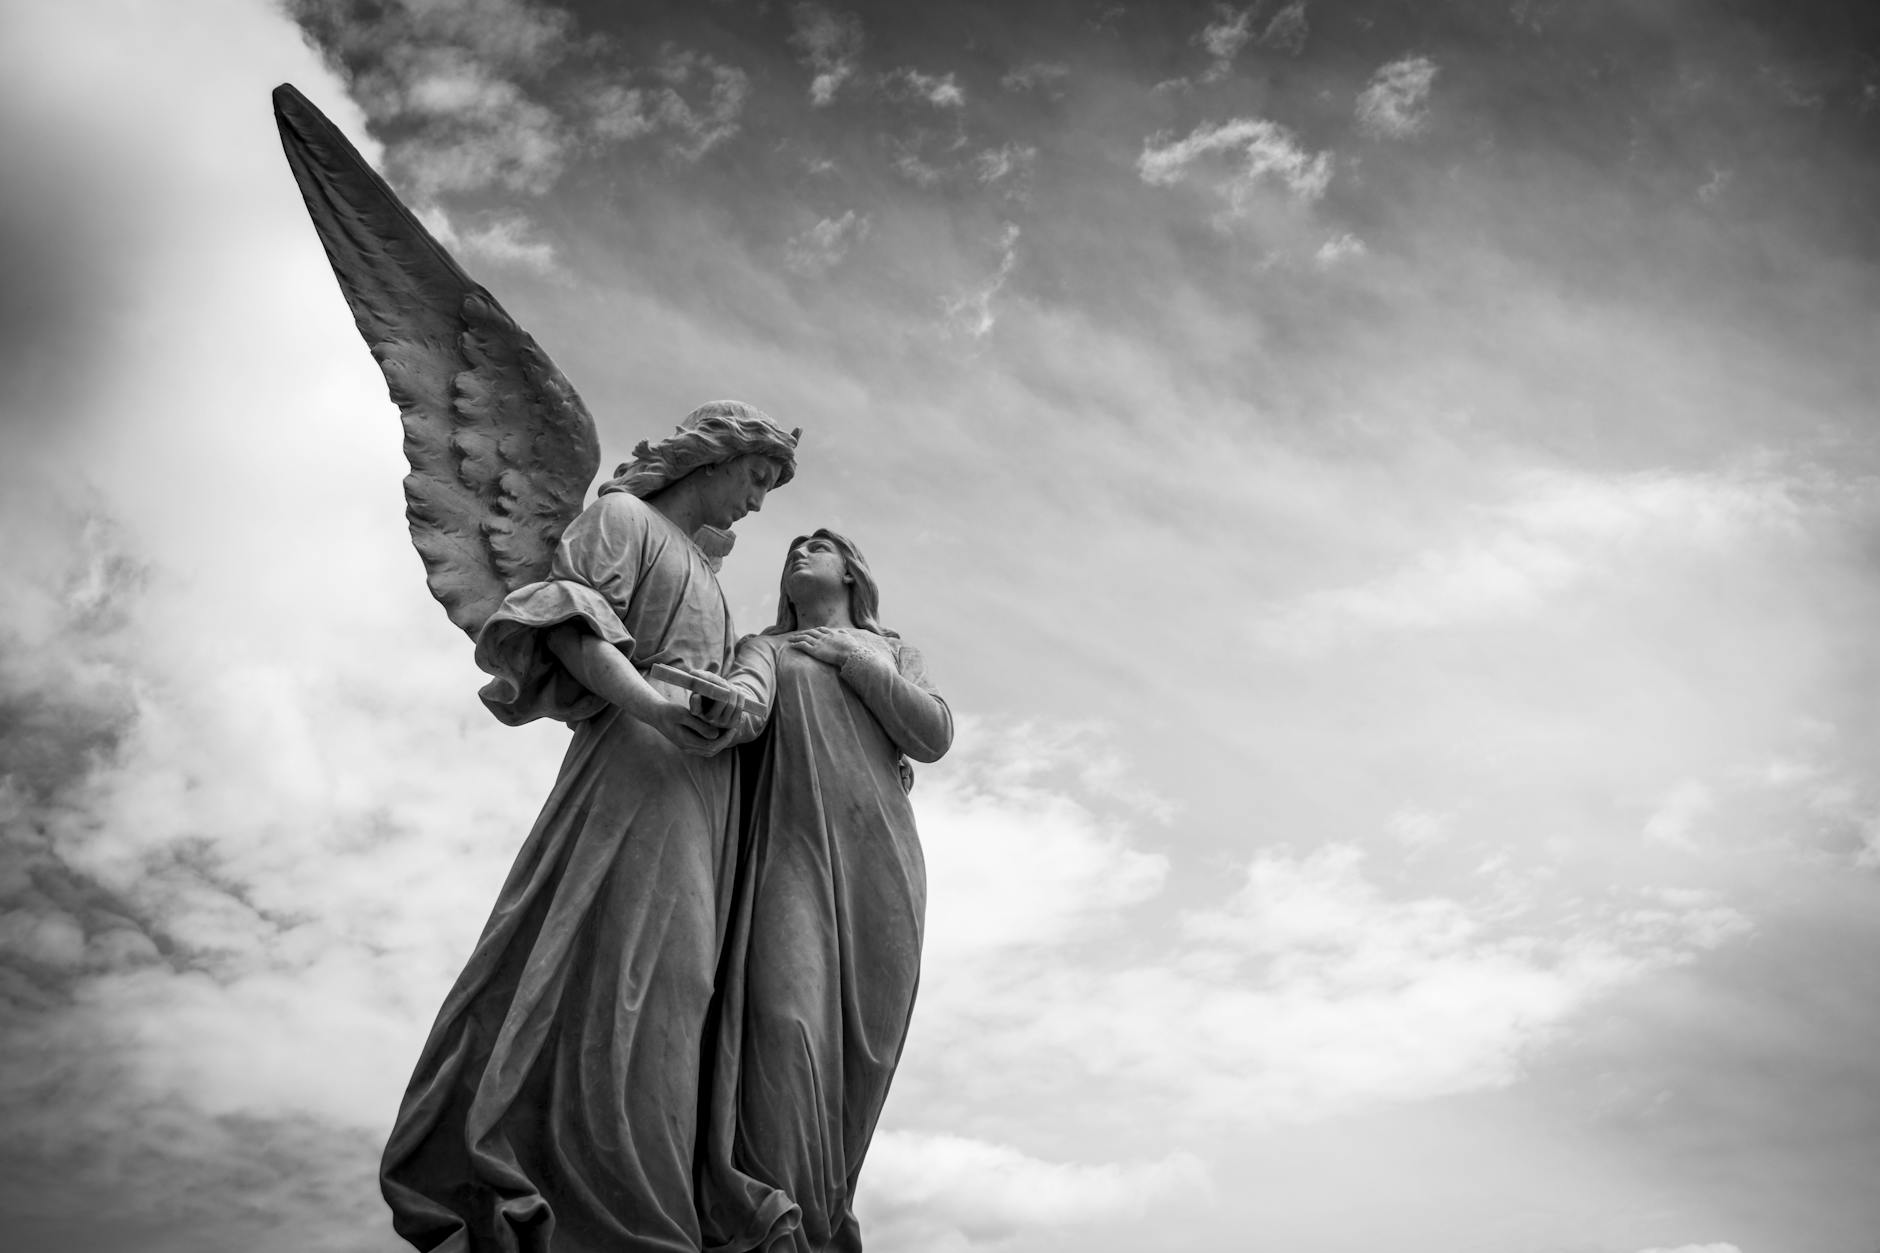 grayscale photography of angel statue under cloudy skies